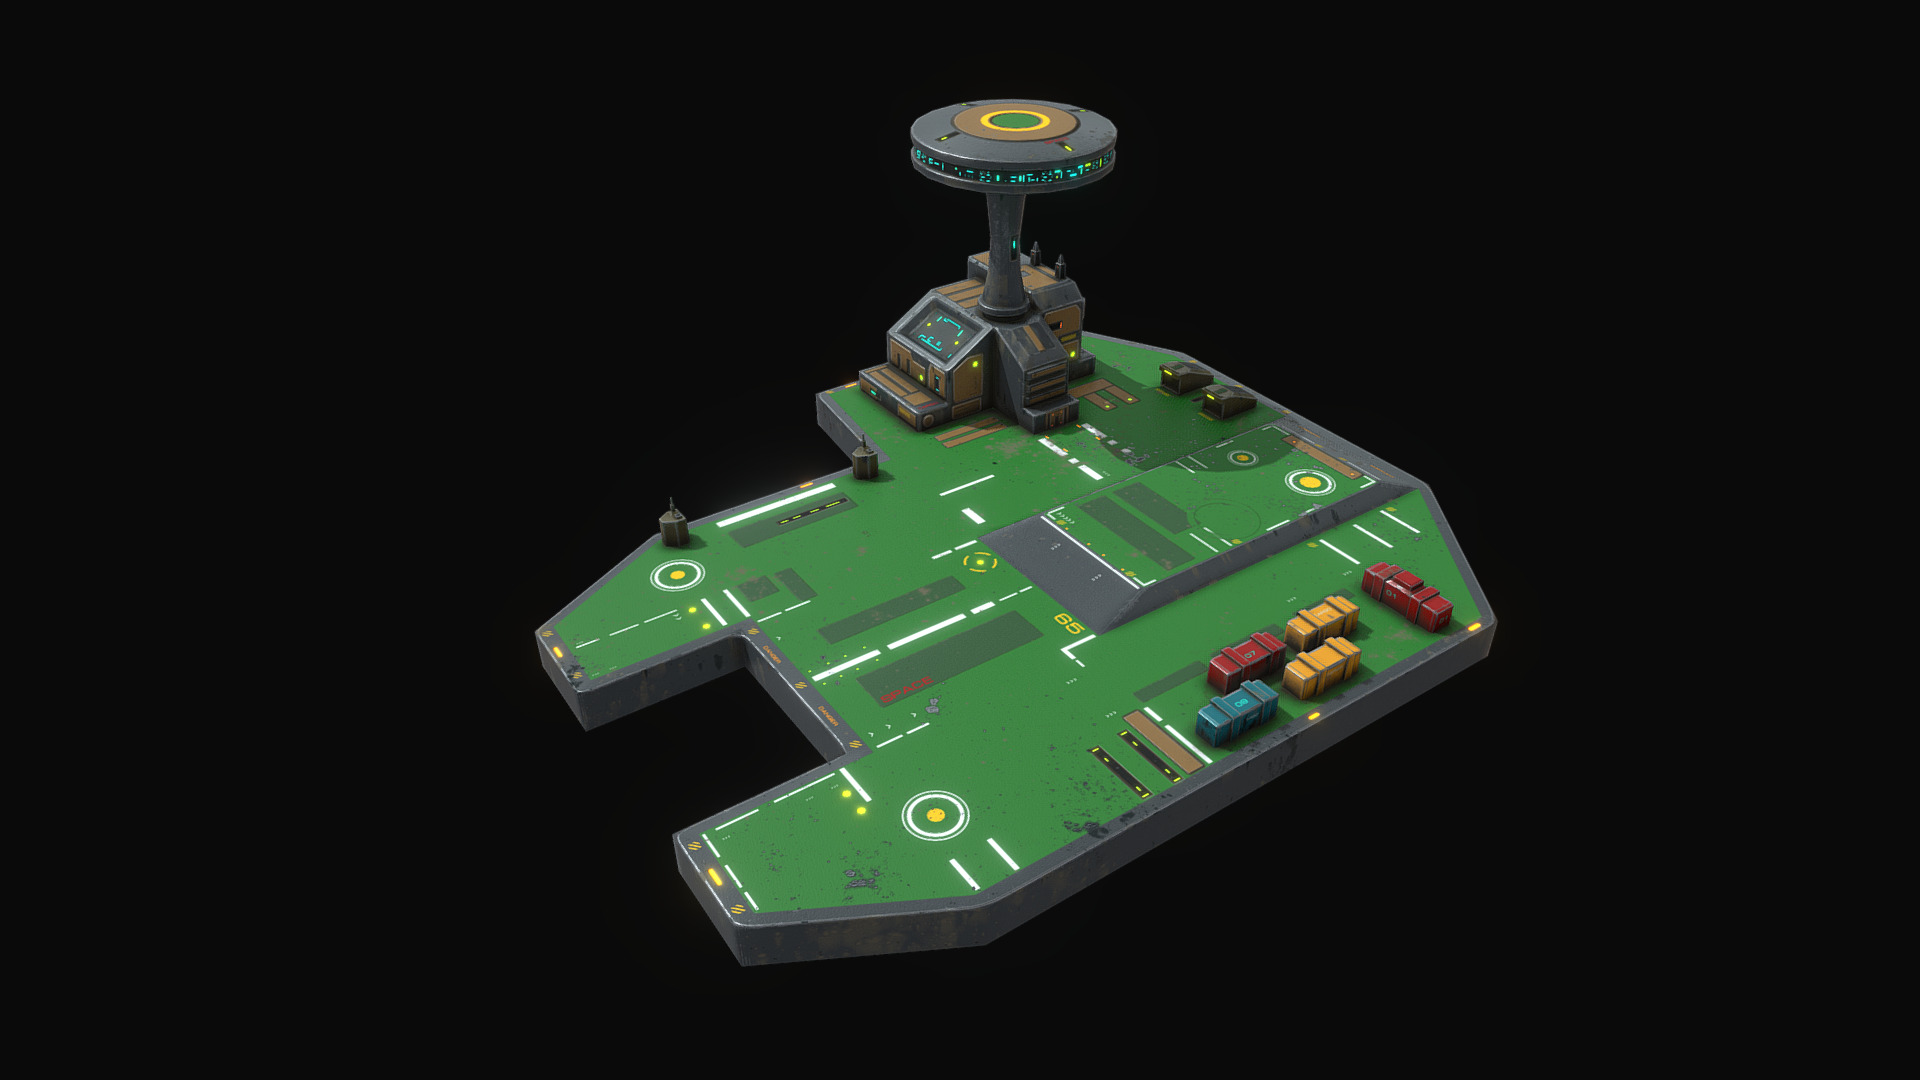 3D model Low poly sci fi airport environment asset - This is a 3D model of the Low poly sci fi airport environment asset. The 3D model is about a green and black electronic device.